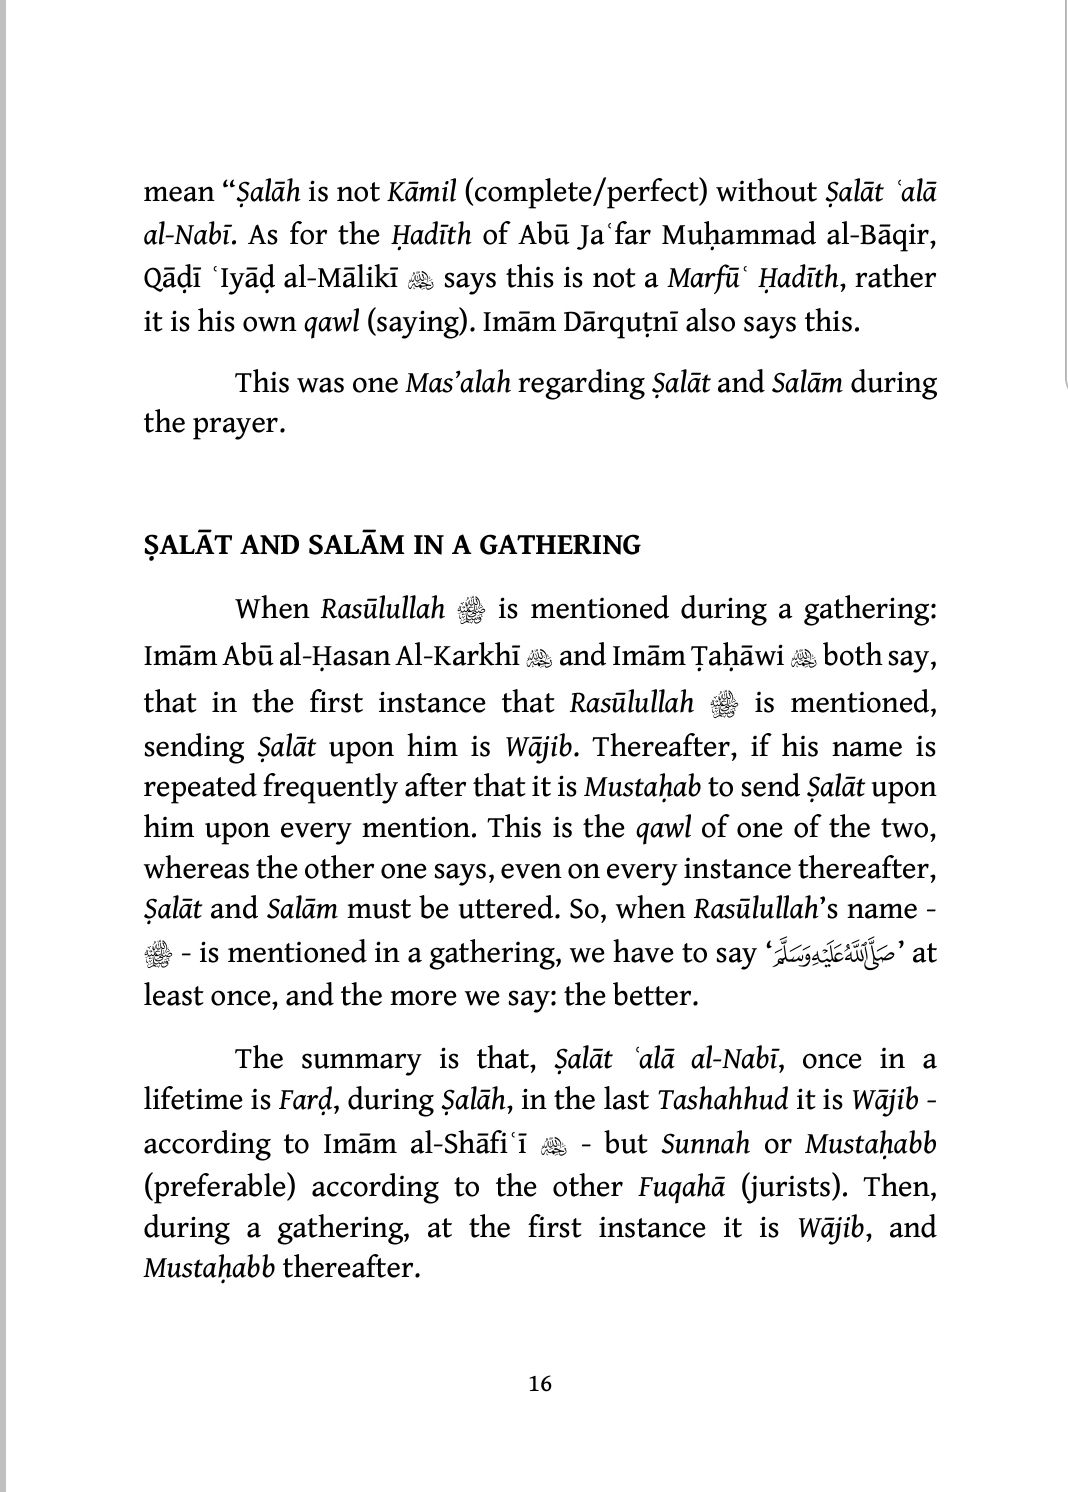 Tafseer of the Verse of Salat and Salam: Commentary of Verse 56 from Surah Al-Ahzab